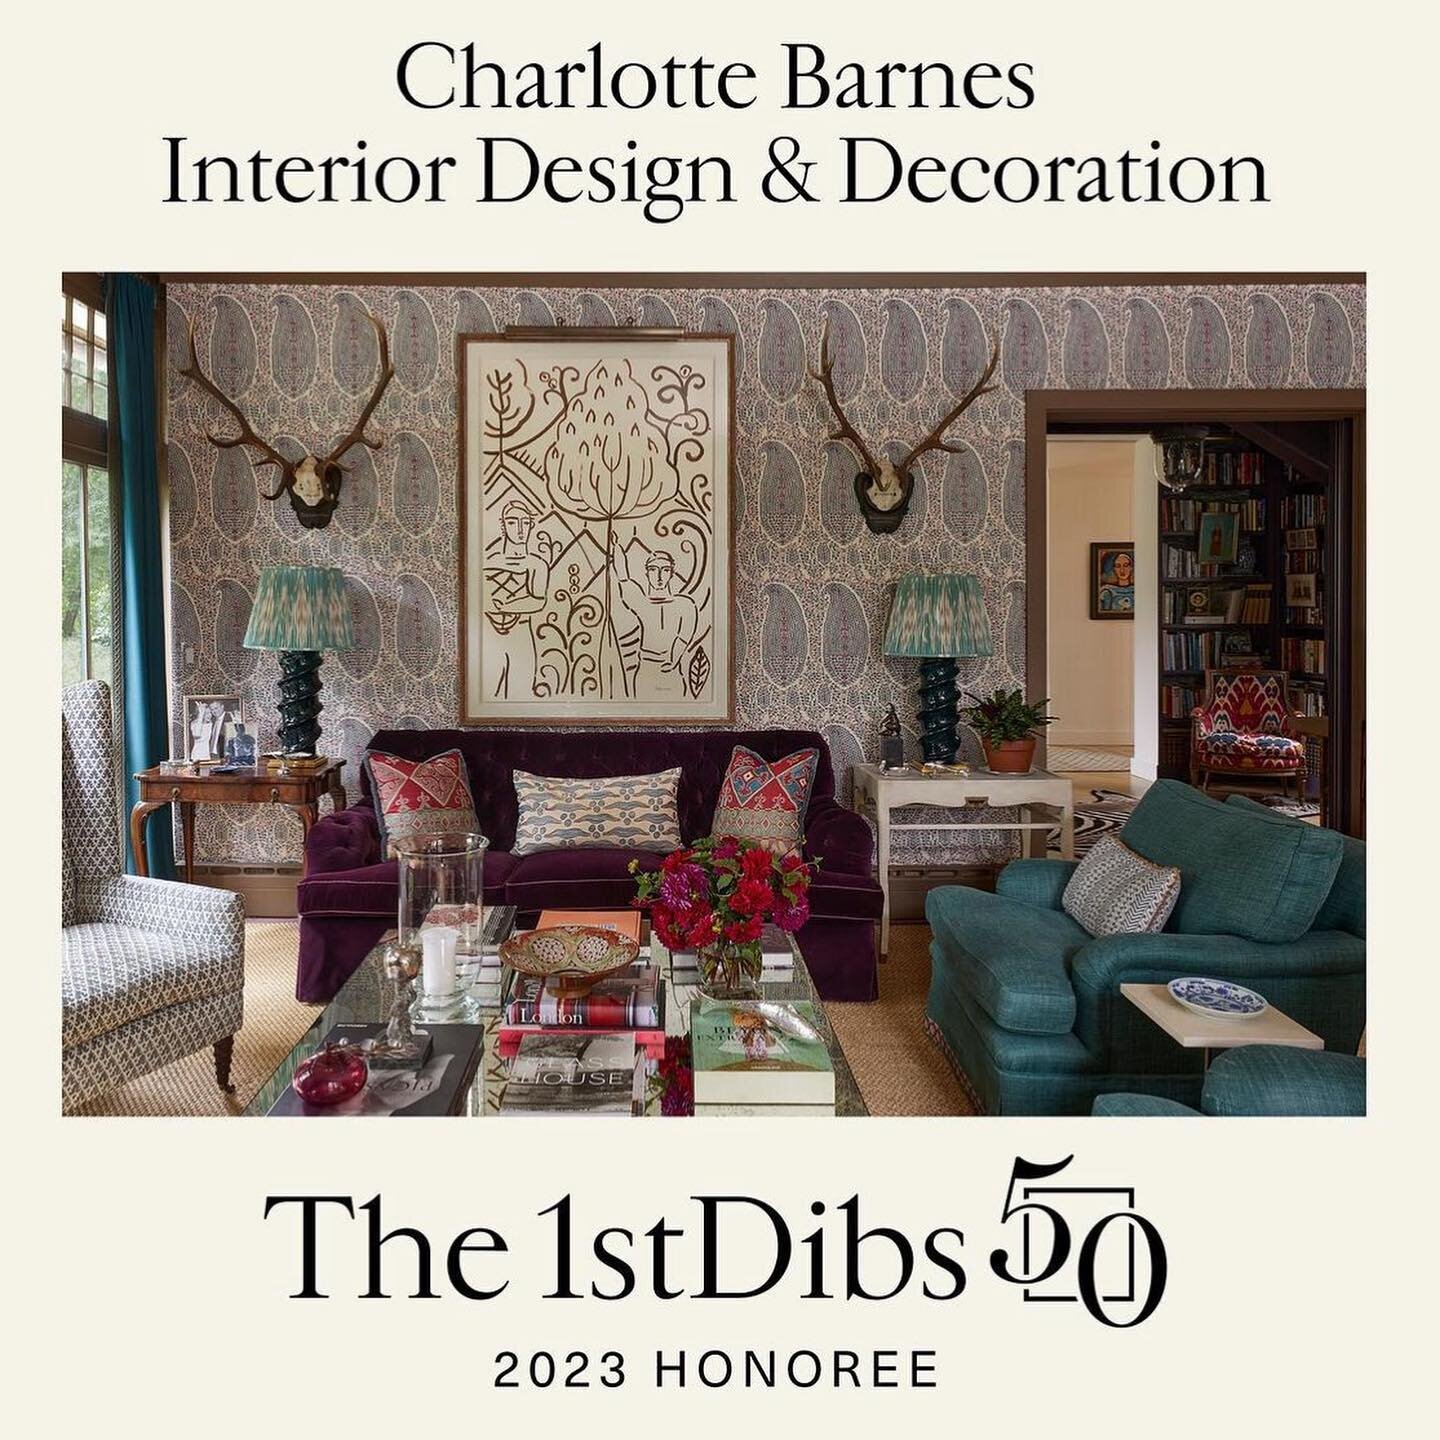 We are so excited that DC members @charlottebarnesdesign and @younghuh are included on the 2023 #1stdibs50 list! Congratulations to all of the designers and their beautiful projects.